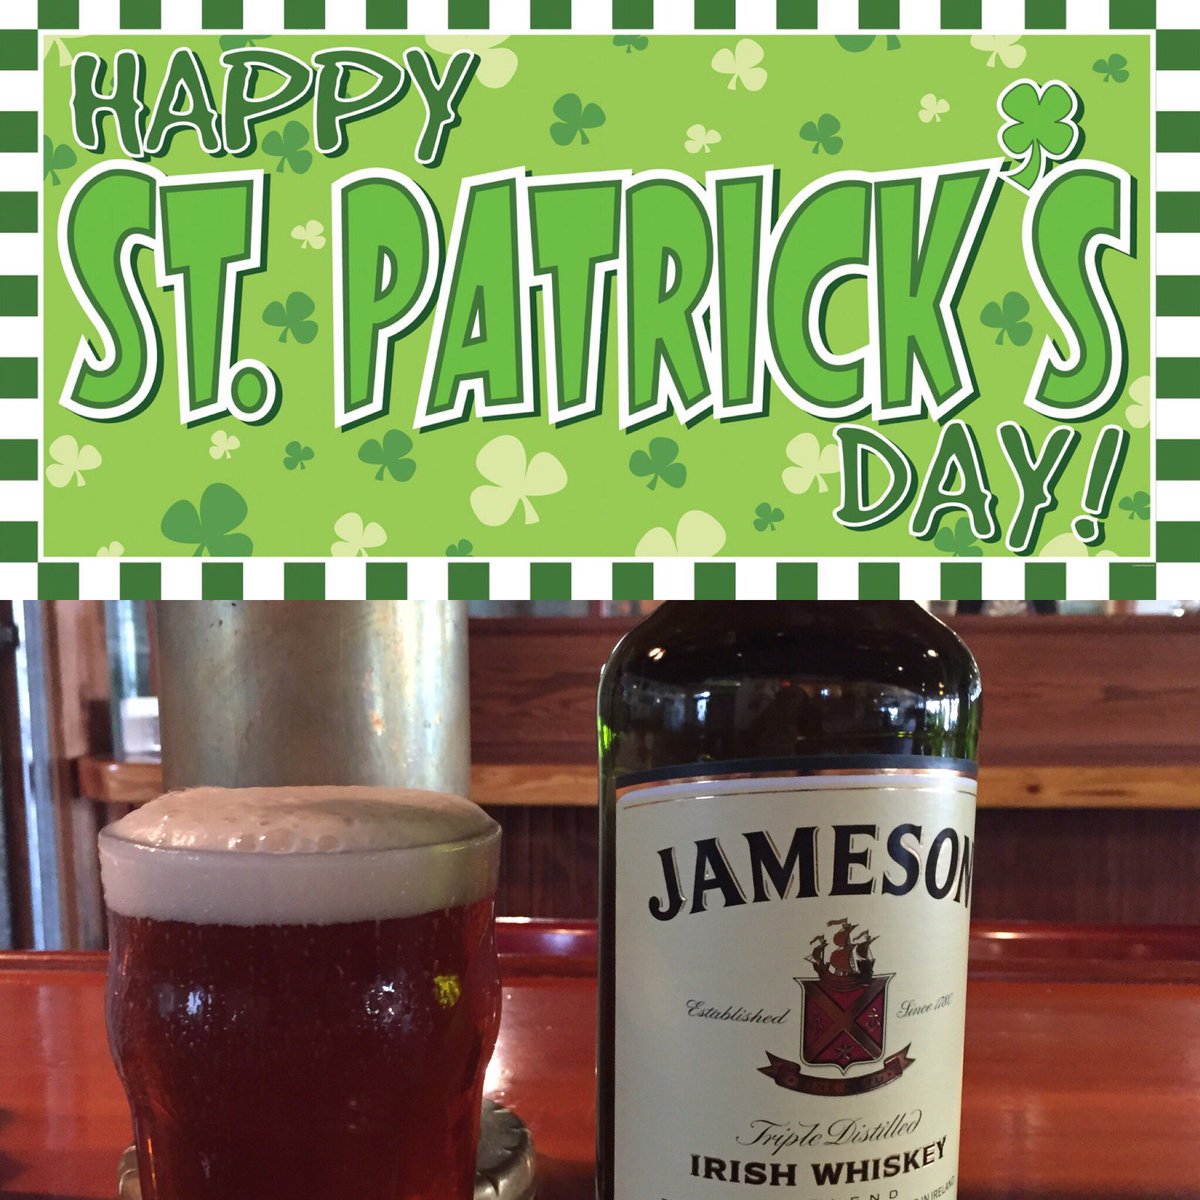 Happy St. Patrick’s Day our drink special today is a five dollar shot of Jameson with a pint of beer #hollywooddistrict #oregoncraftbeer #drinking #whiskey #stpattysday